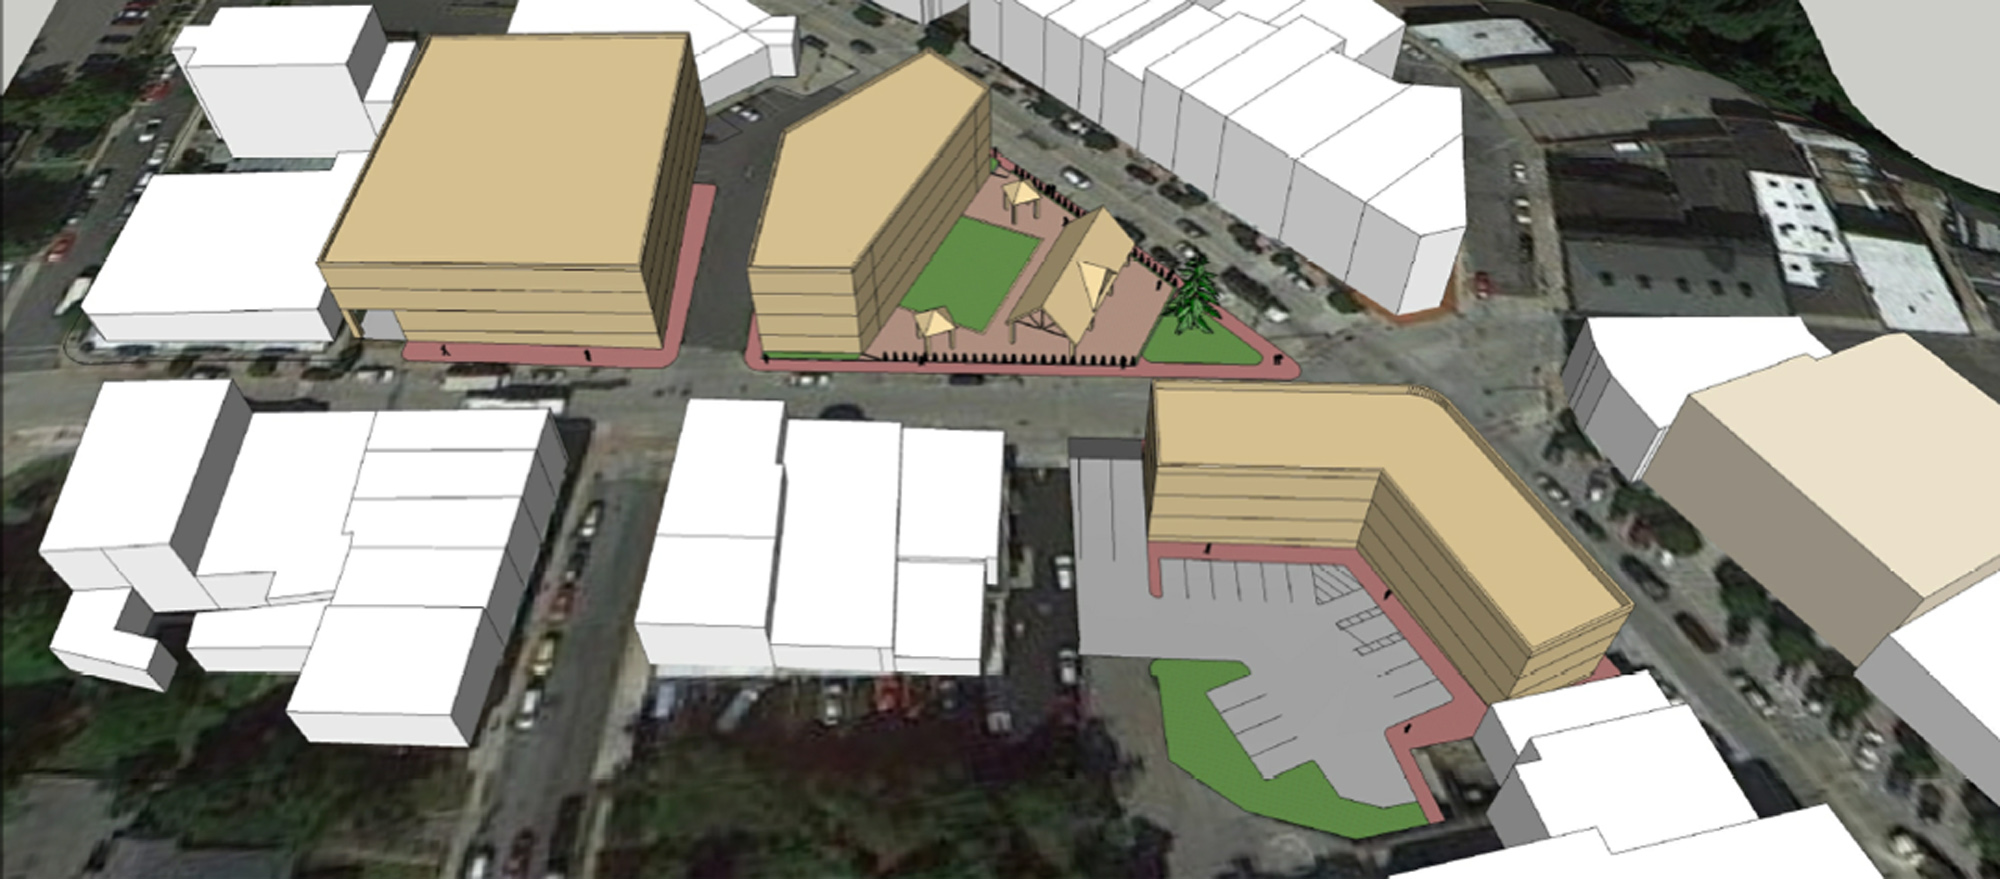 A downtown design view of DRG’s first proposed development scenario for the Village of Ossining’s Market Square and parking lots at the intersection of Main and Spring Streets